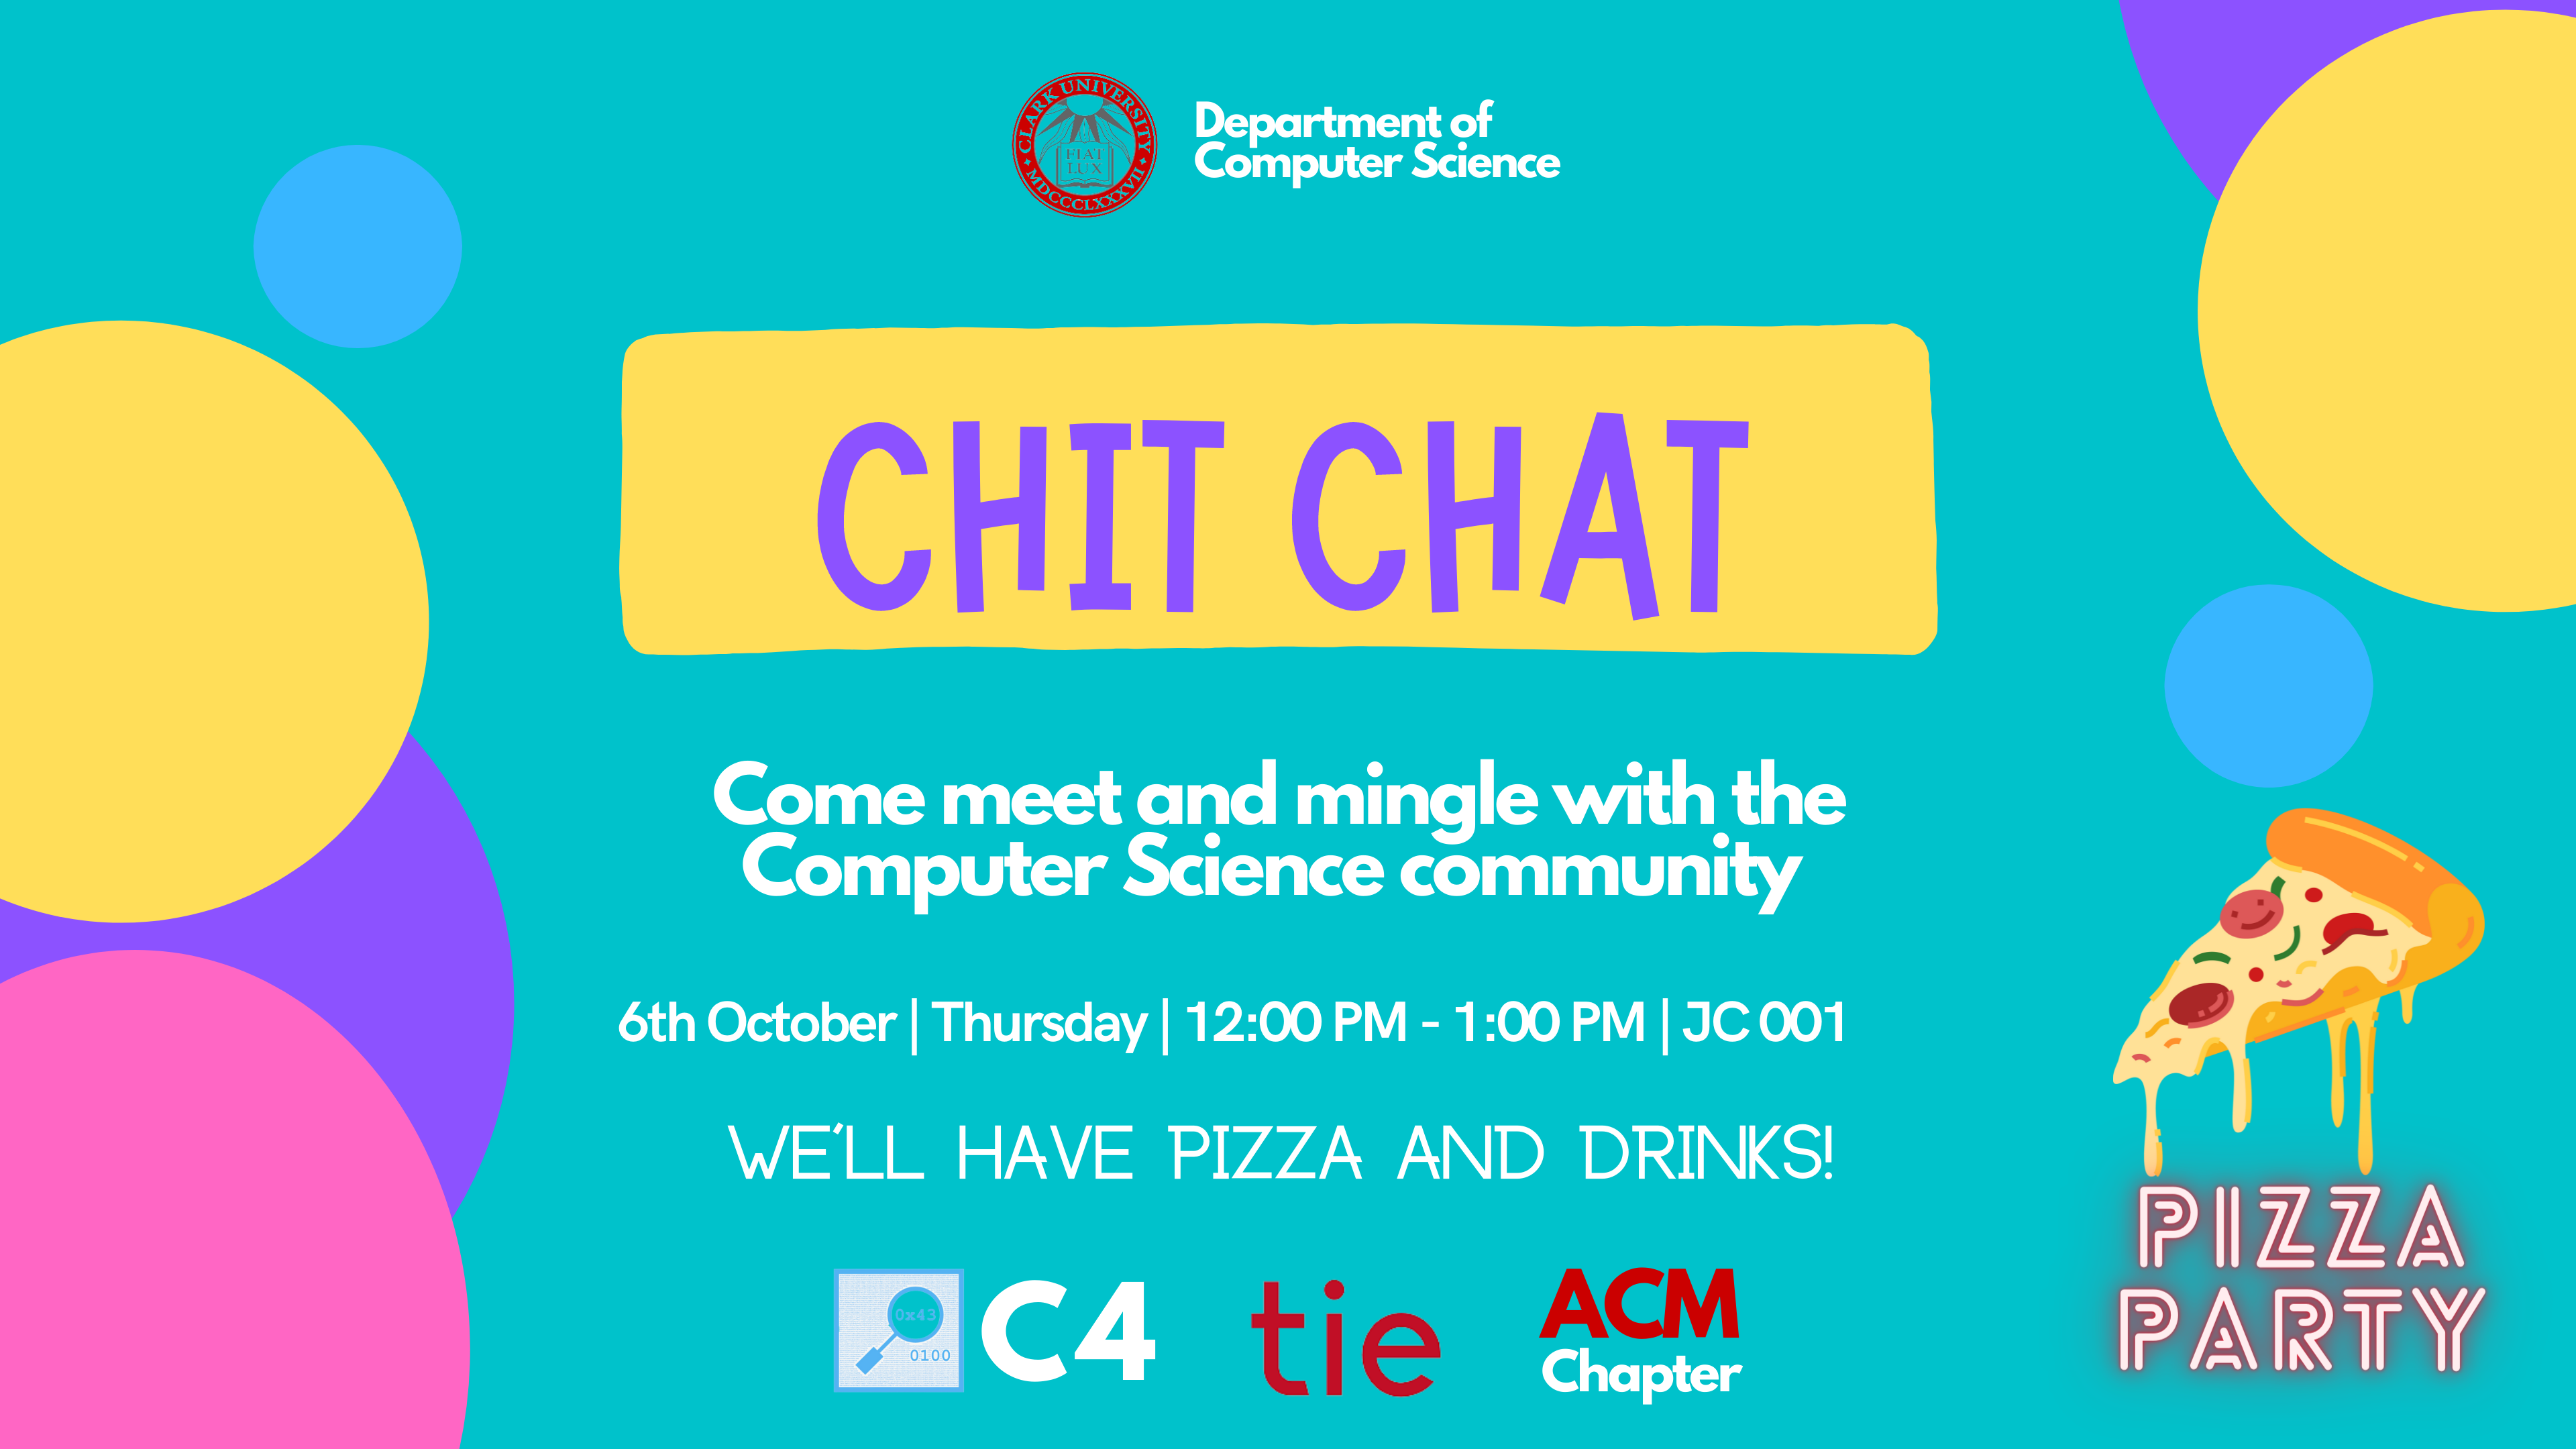 Chit Chat Event on Oct 6th 12 - 1 PM in JC 001